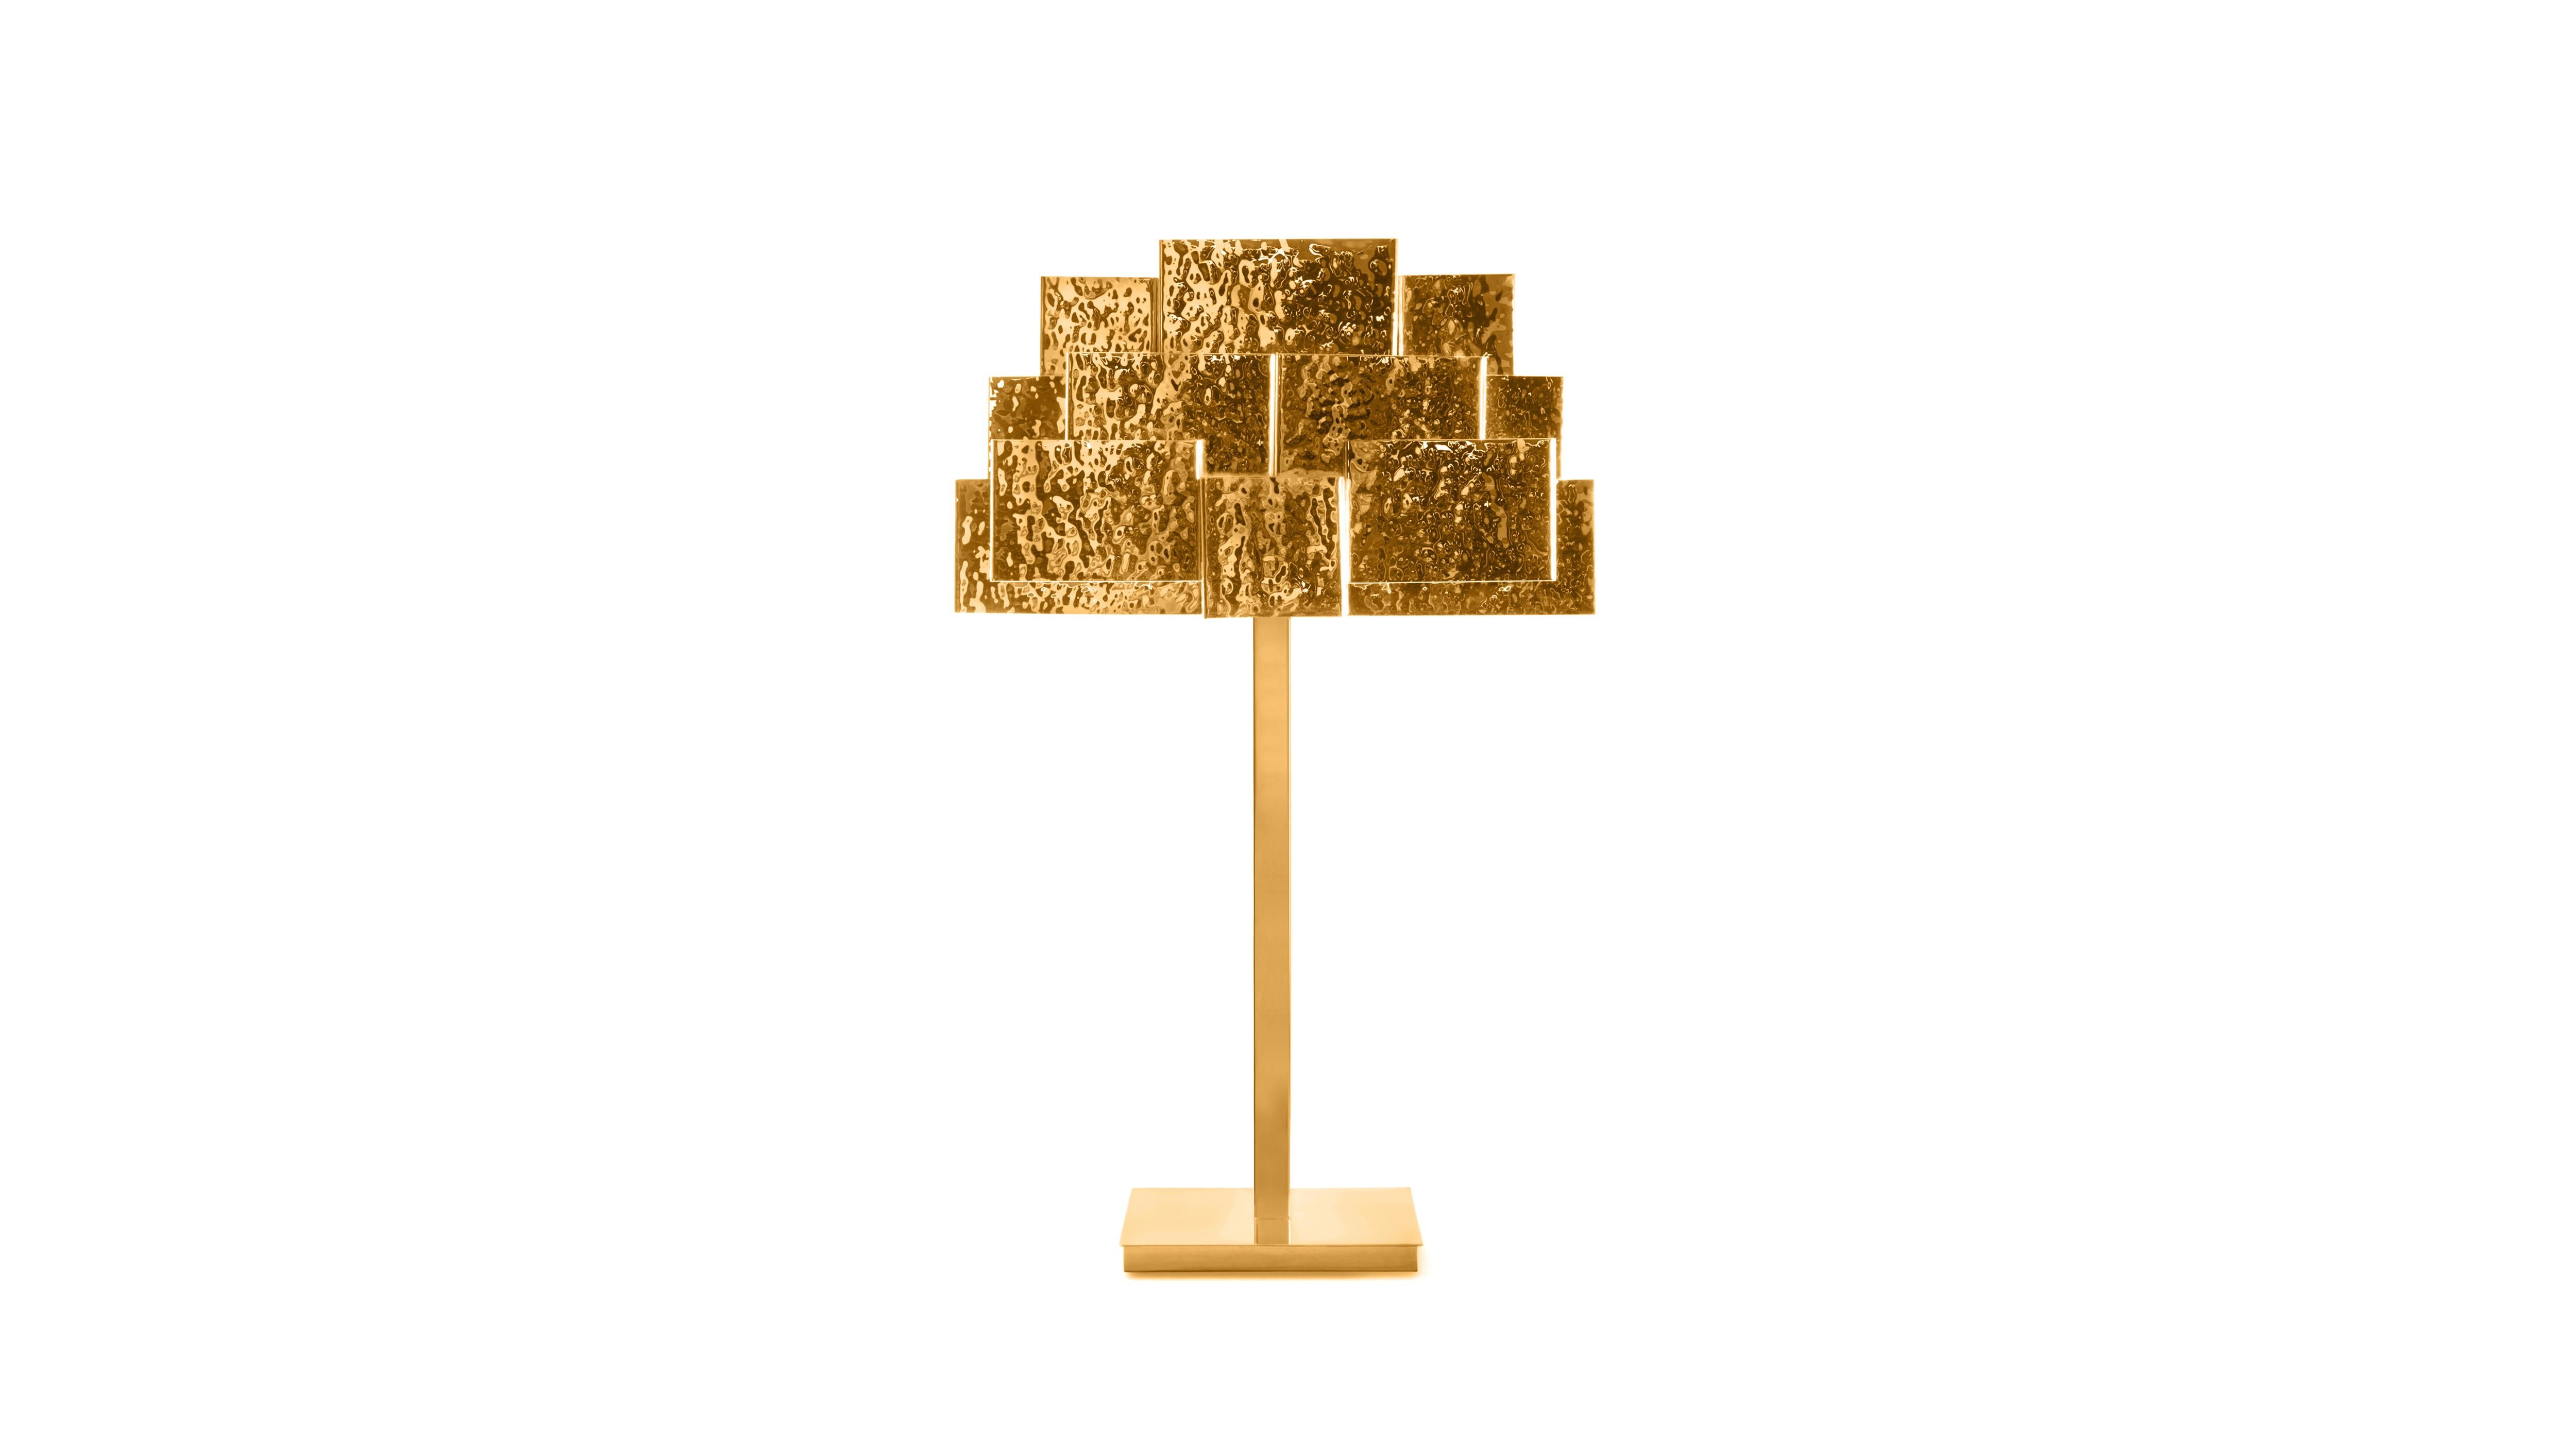 Inspiring Trees Hammered Golden Brass Table Lamp by InsidherLand
Dimensions: D 31 x W 39 x H 60 cm.
Materials: hammered brass with golden bath, polished brass with golden bath.
4 kg.
Available in other metals.

Inspiring Trees is the essence of a